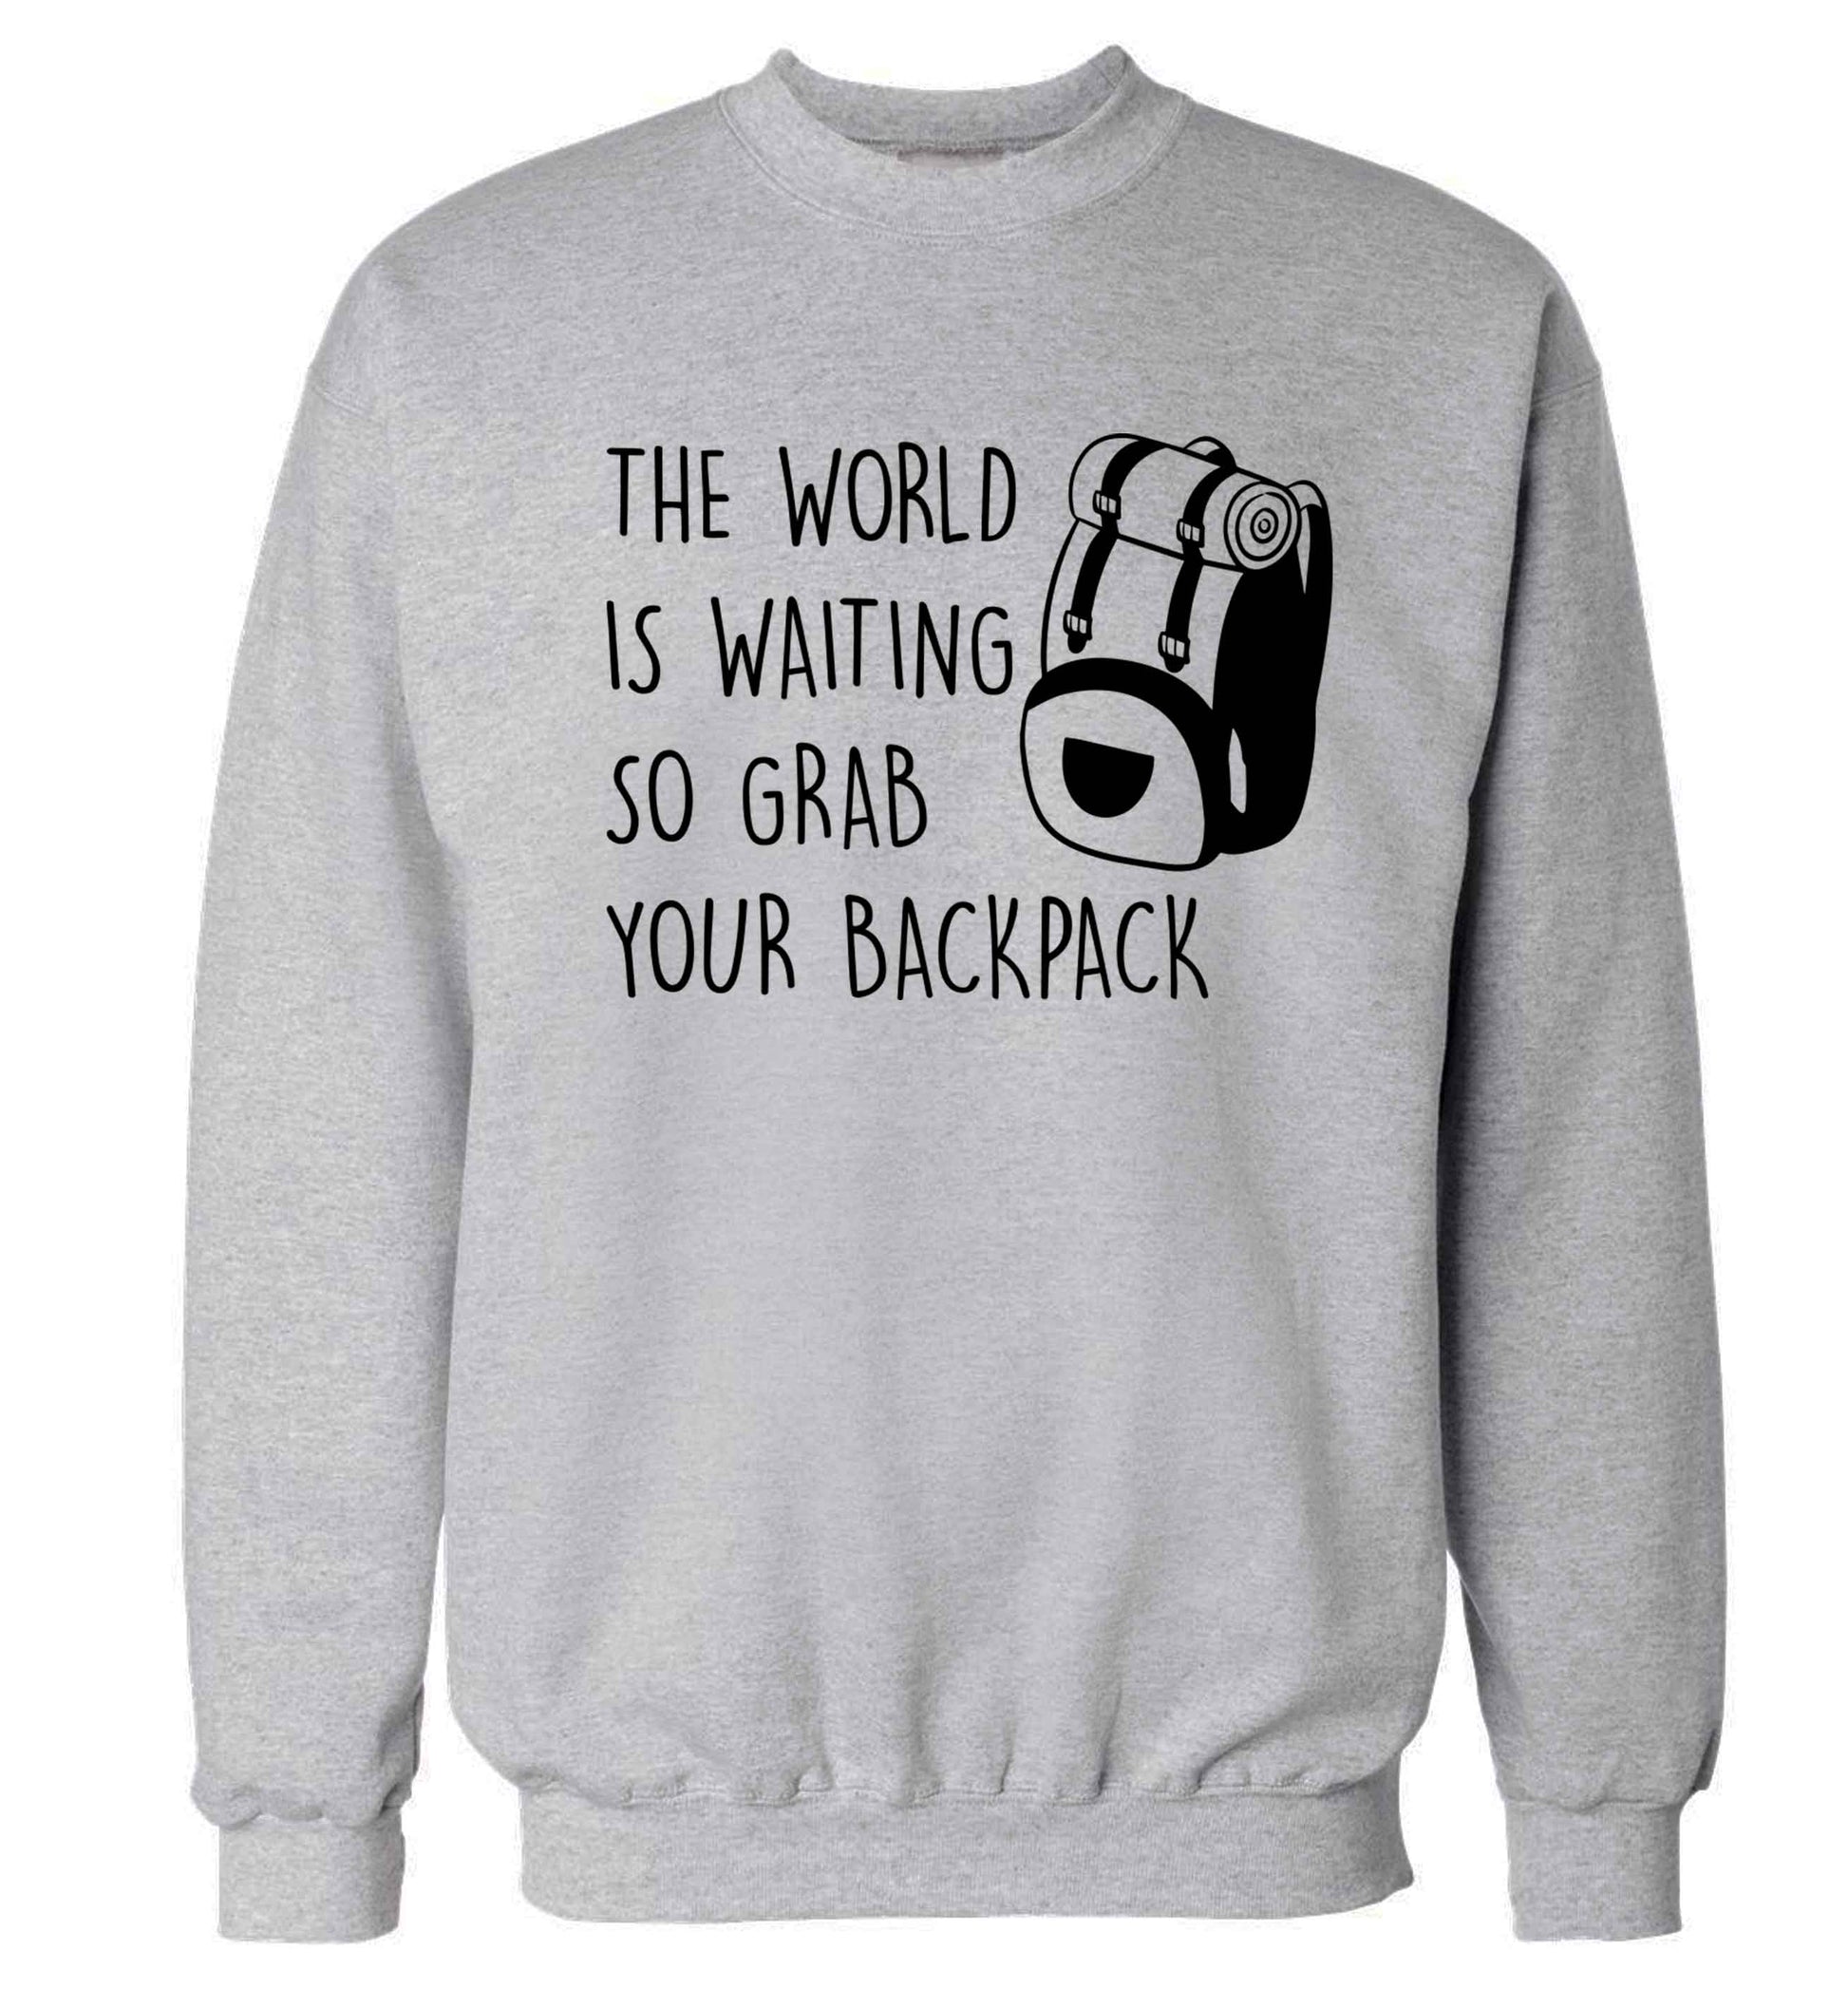 The world is waiting so grab your backpack Adult's unisex grey Sweater 2XL